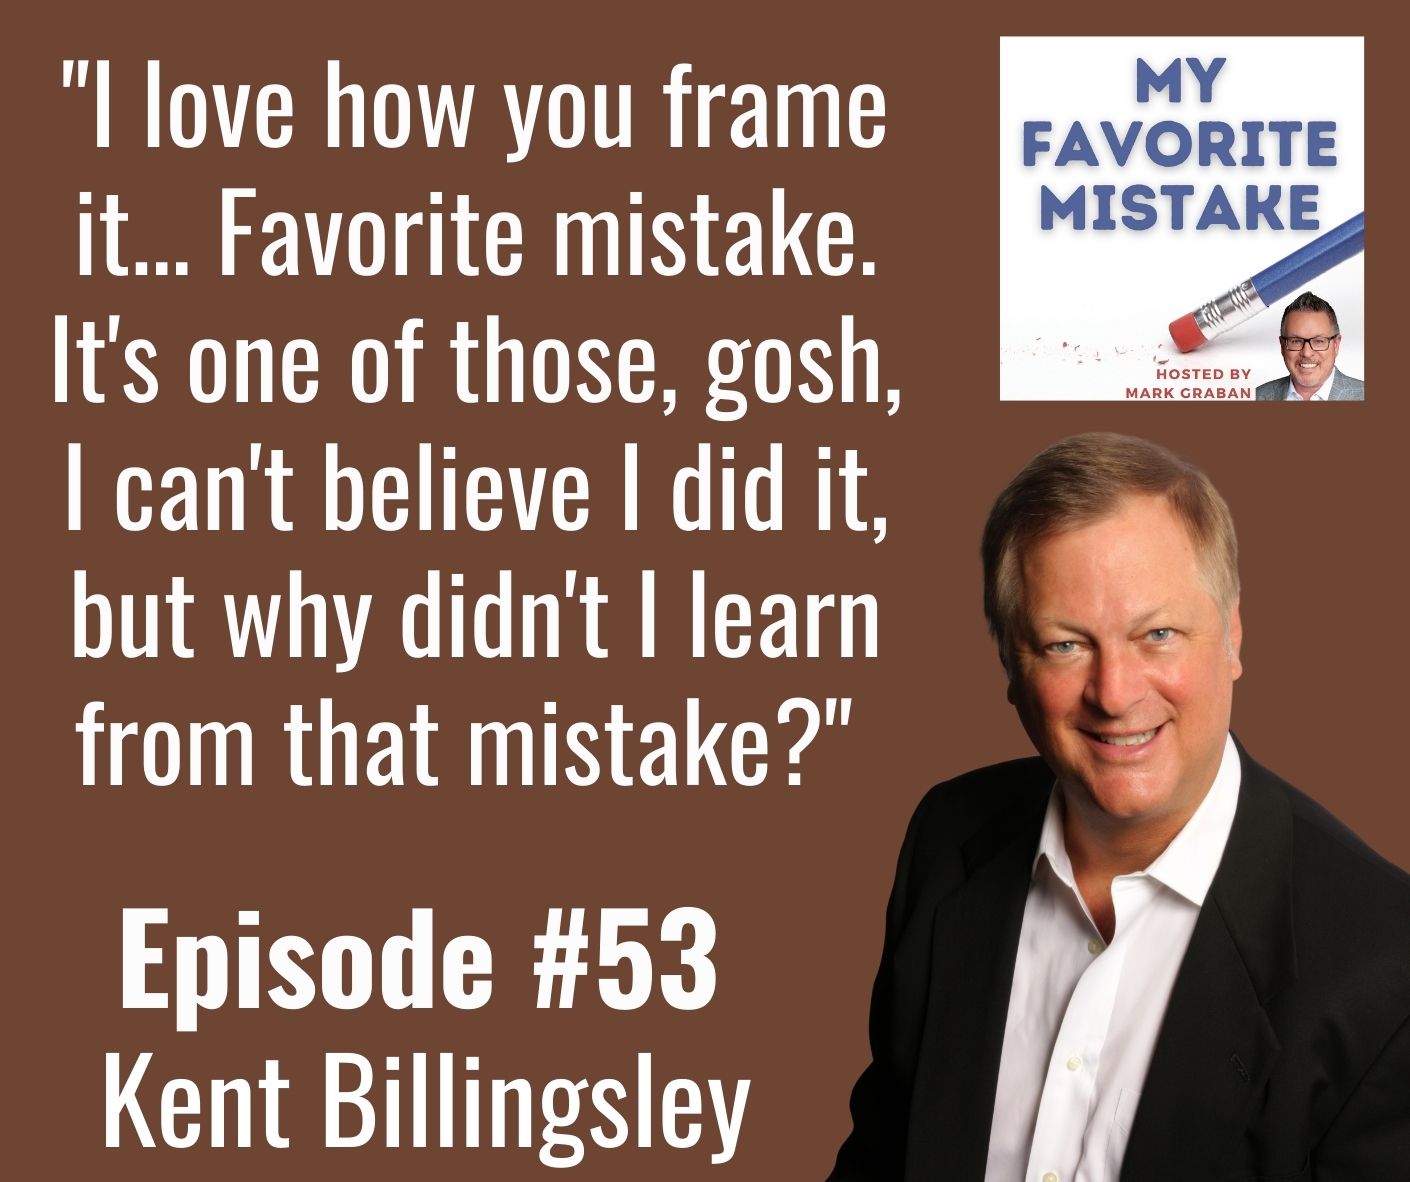 "I love how you frame it... Favorite mistake. It's one of those, gosh, I can't believe I did it, but why didn't I learn from that mistake?" 